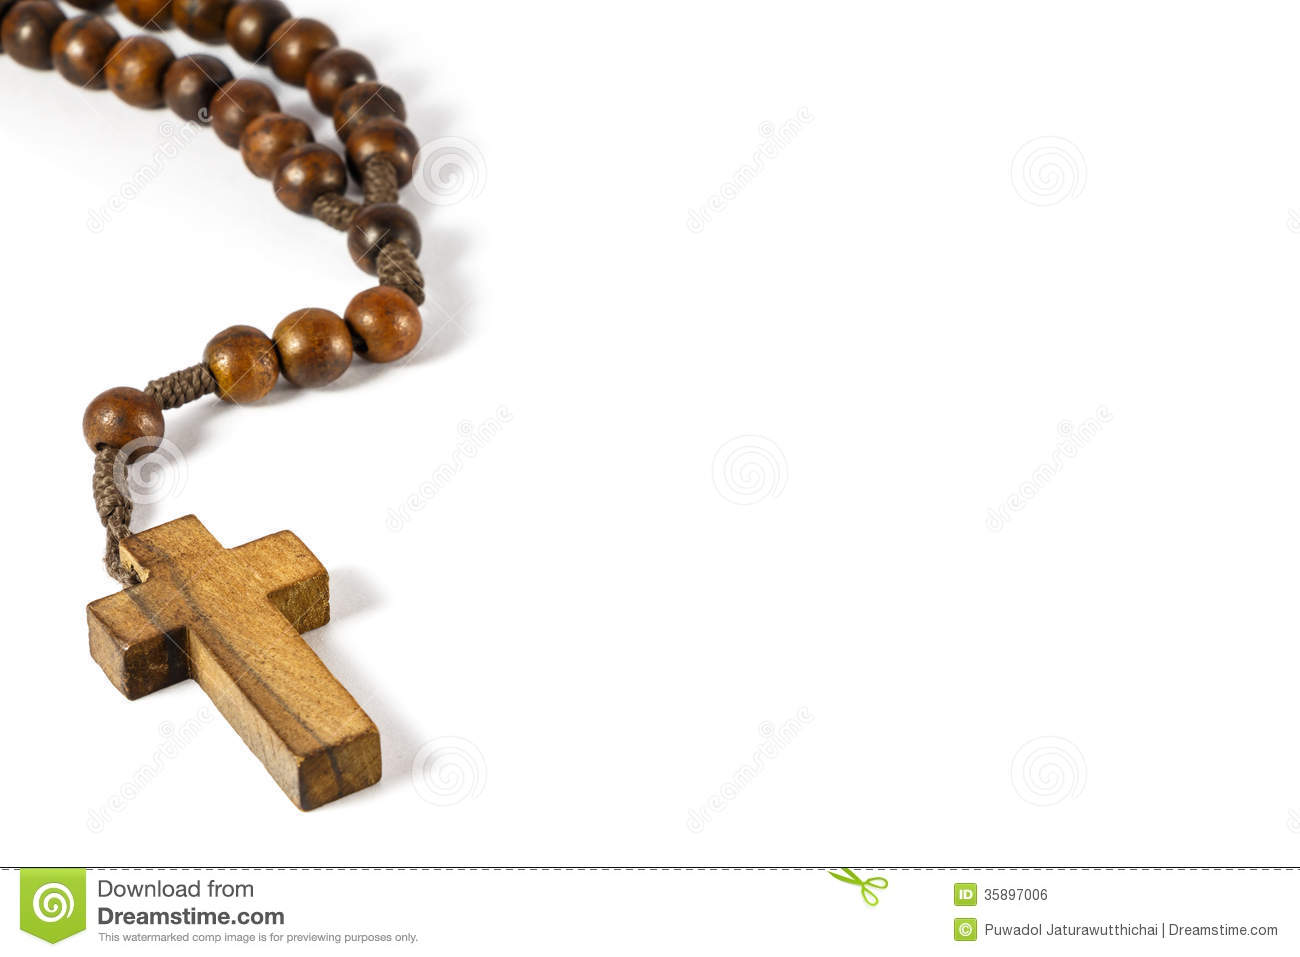 Wood Rosary With Cross At Left Border Royalty Free Stock Image   Image